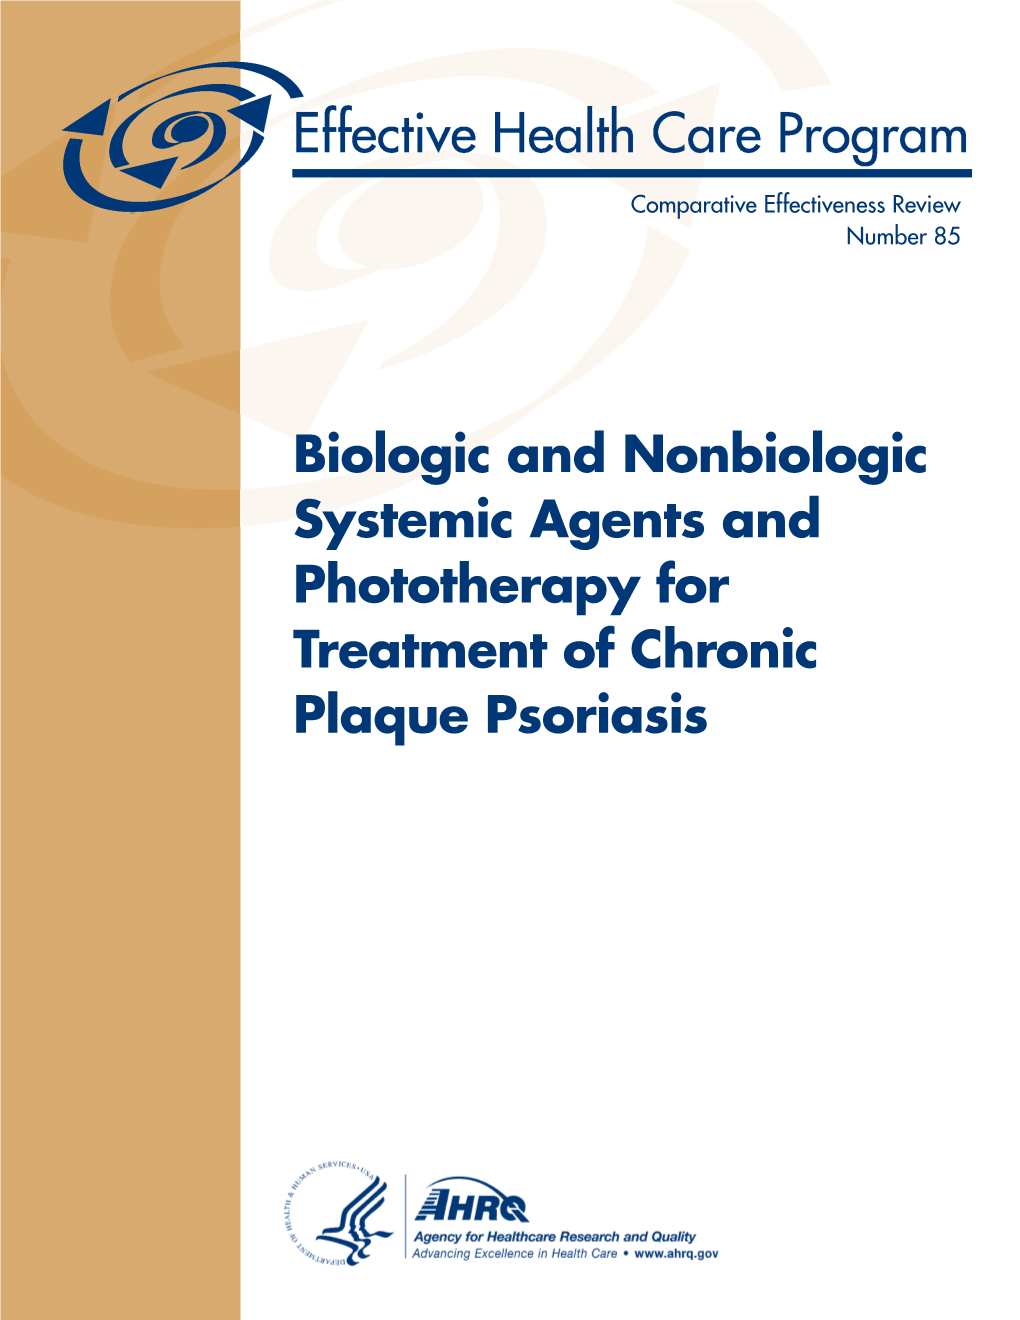 CER 85: Biologic and Nonbiologic Systemic Agents and Phototherapy for Treatment of Chronic Plaque Psoriasis